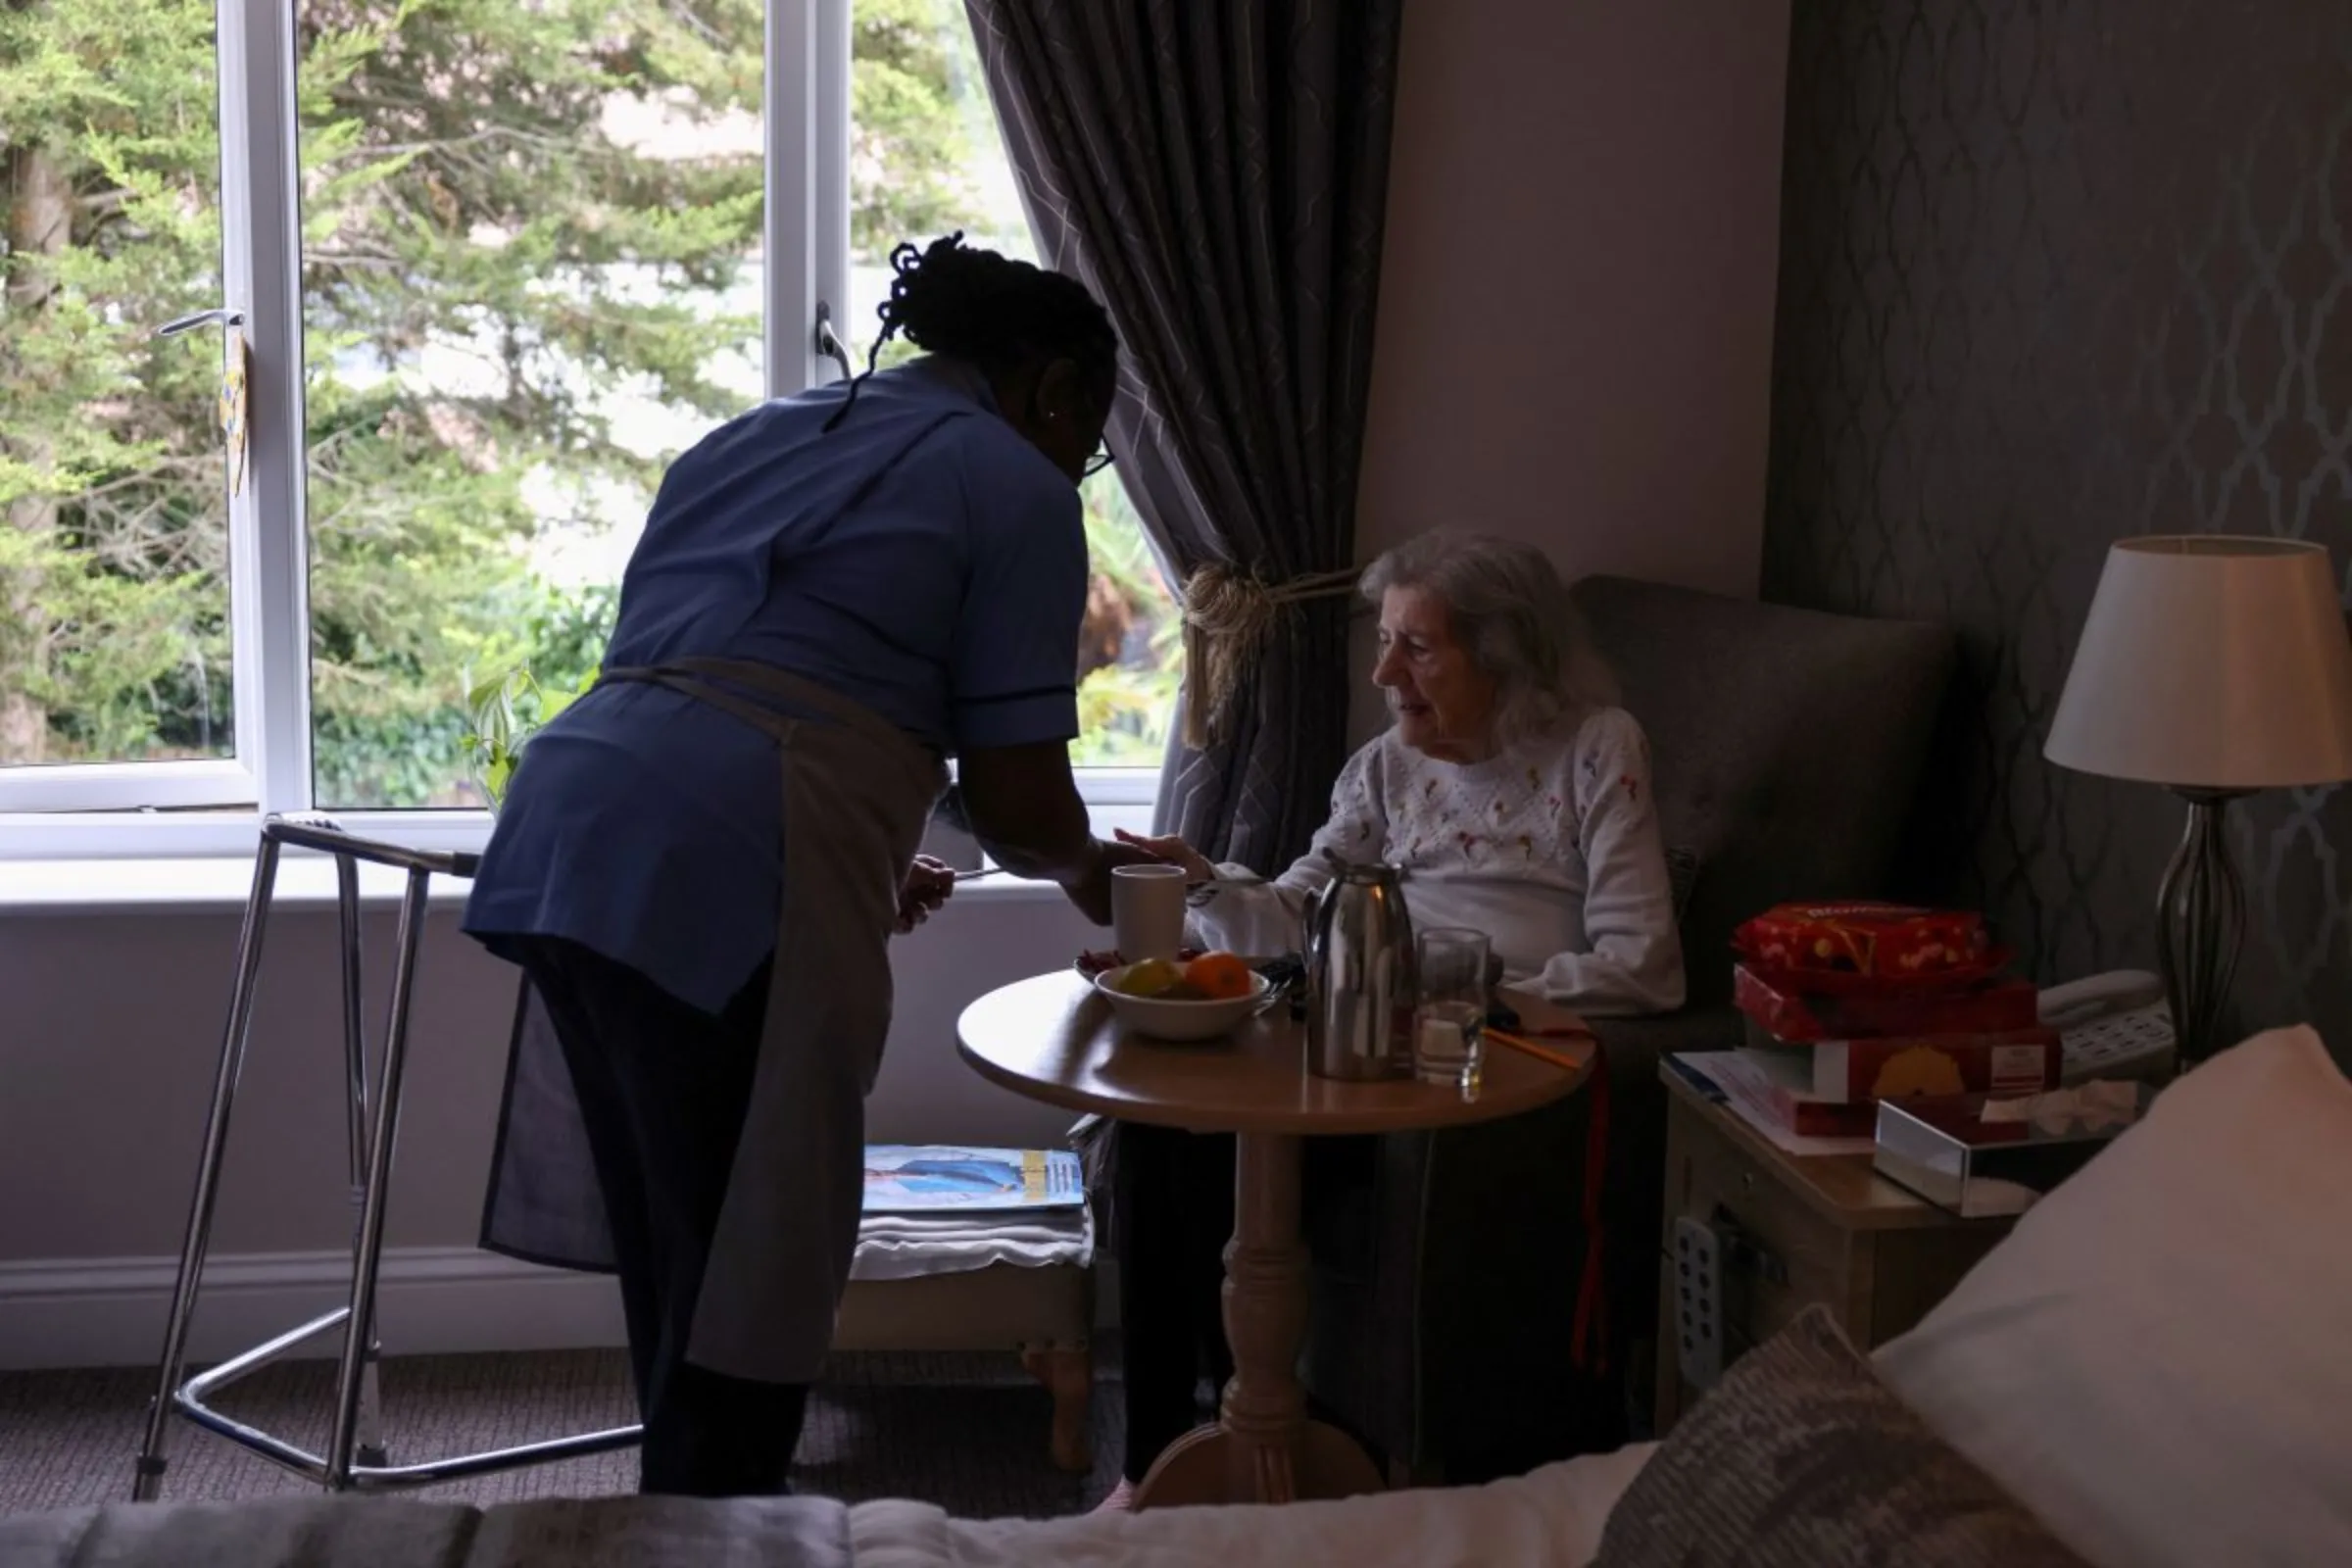 A care home worker serves a meal to a resident at a care home in south London, Britain, July 29, 2023. REUTERS/Hollie Adams